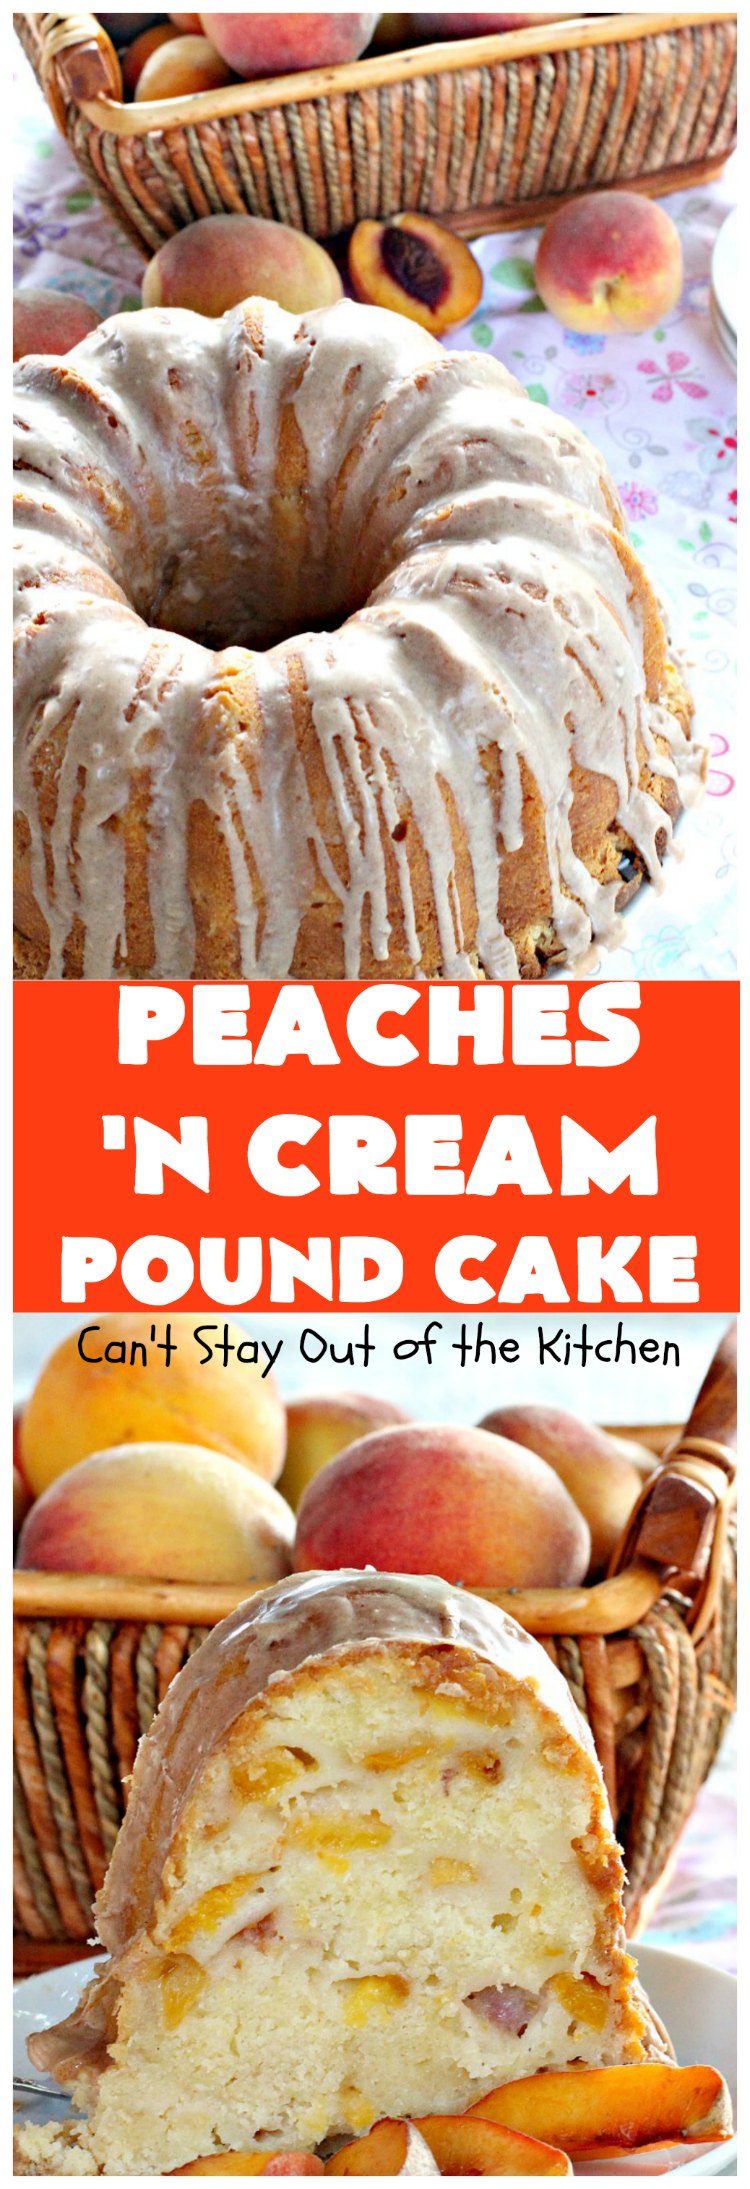 Peaches 'n Cream Pound Cake | Can't Stay Out of the Kitchen